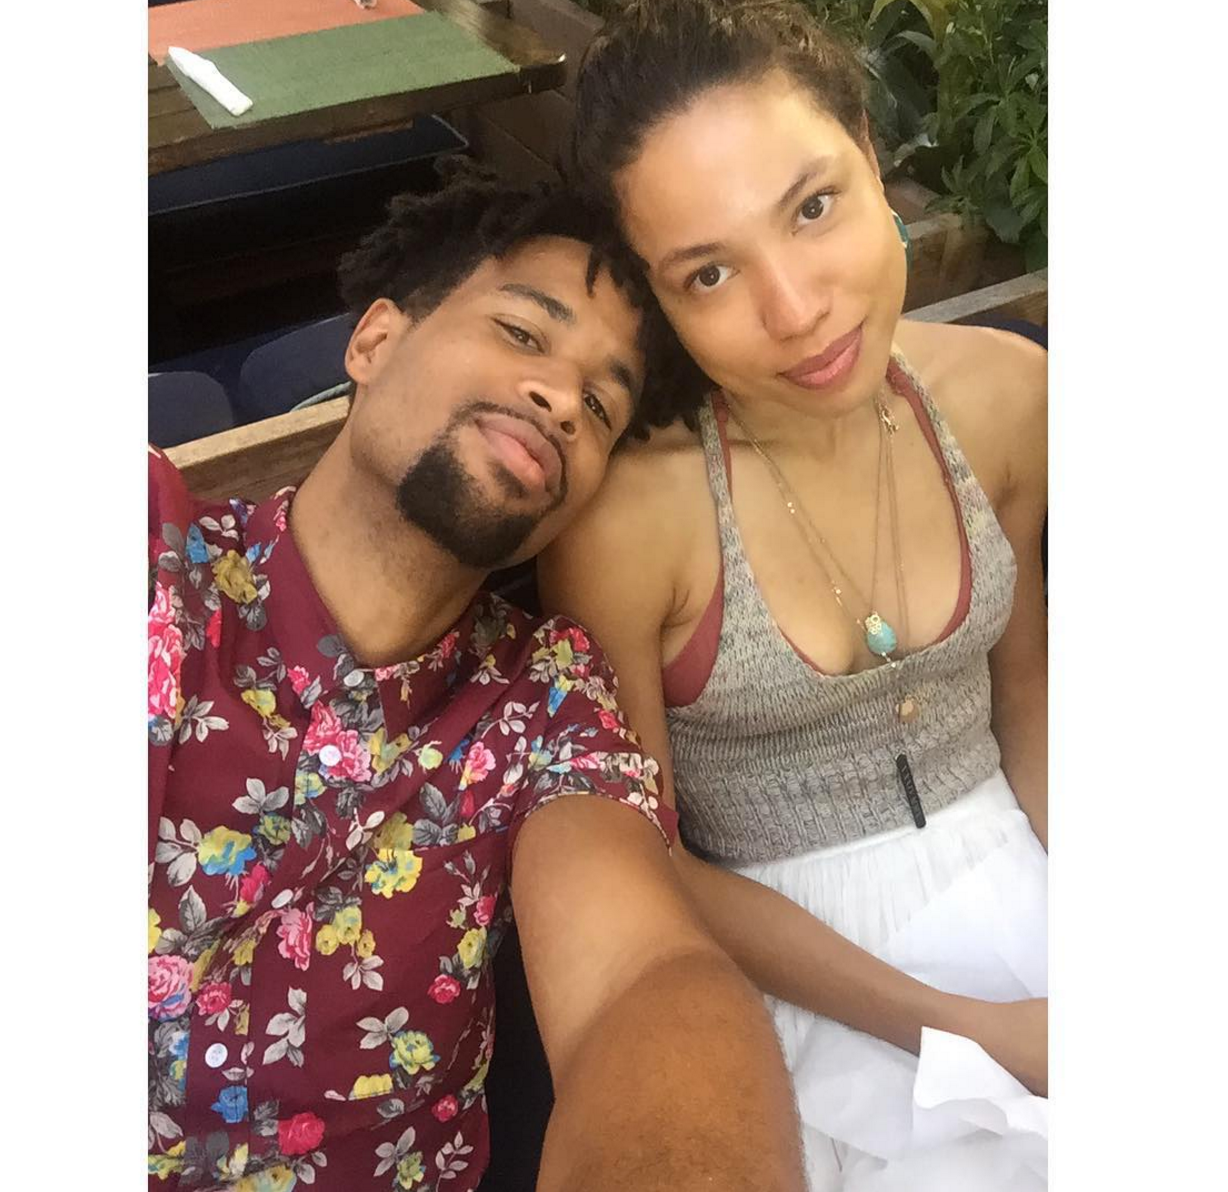 7 Super Cute Moments In Jurnee Smollett-Bell And Her Husband Josiah's Marriage
